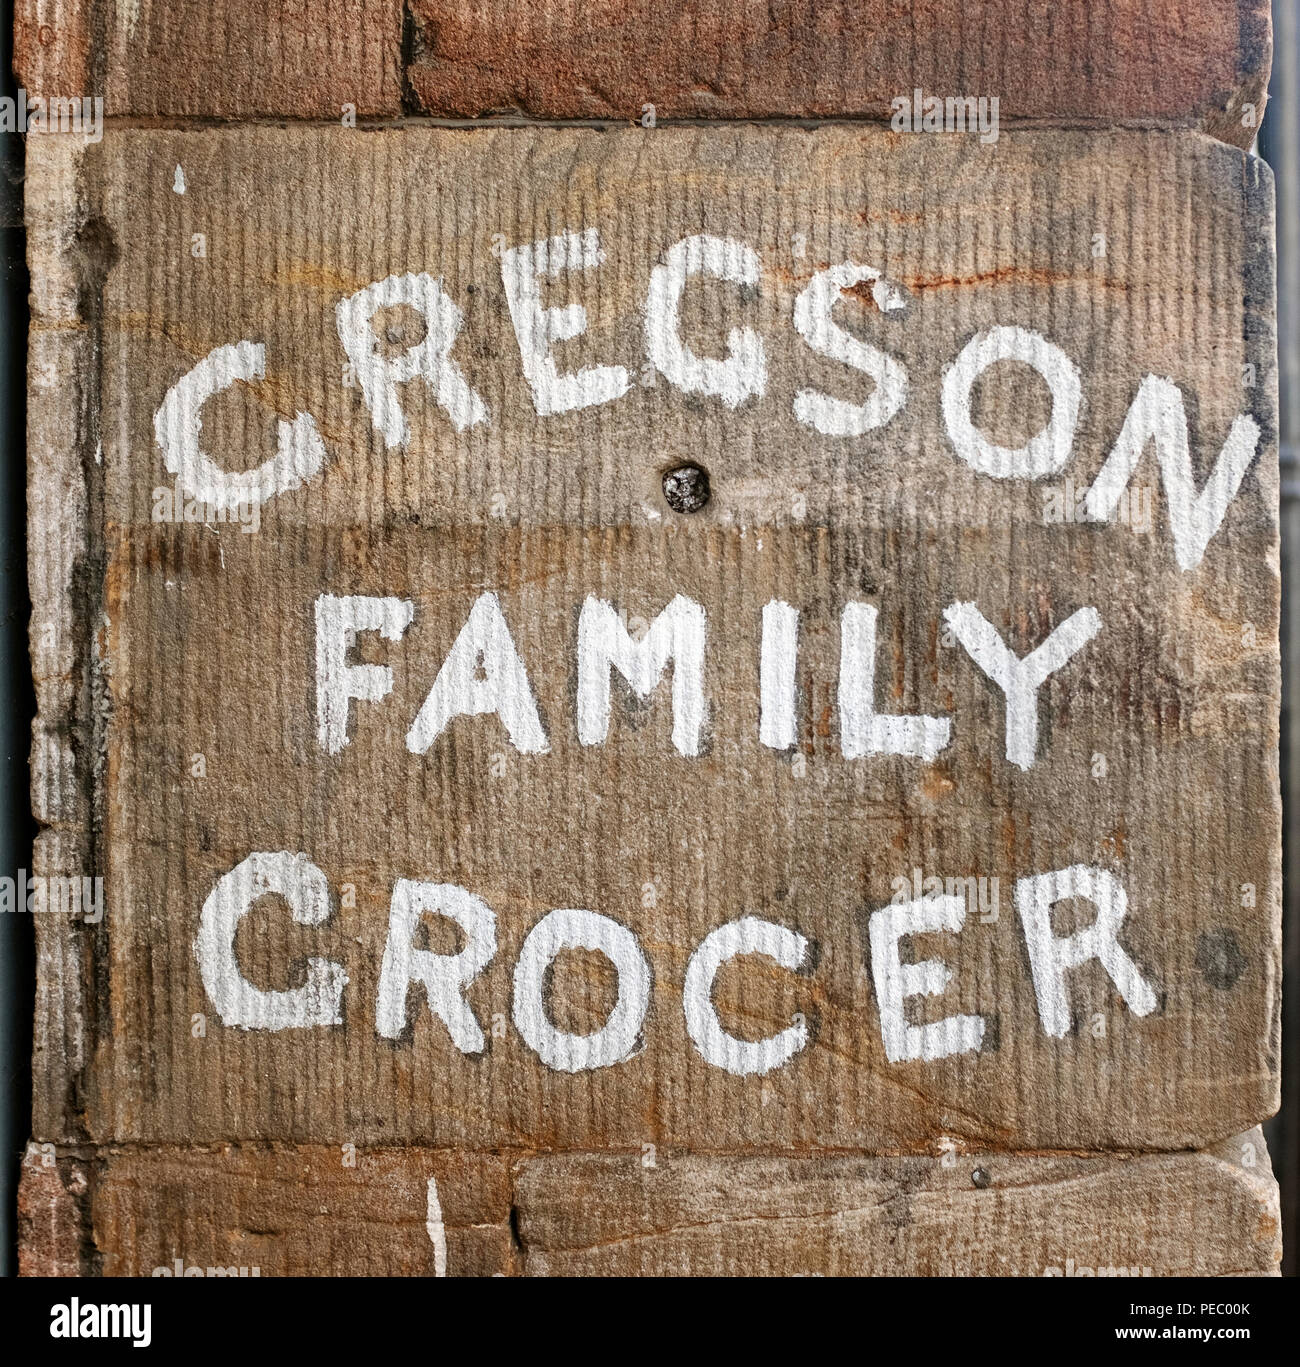 Gregson Family Grocer sign on stonework, Appleby-in-Westmorland, Cumbria, England. United Kingdom. Stock Photo